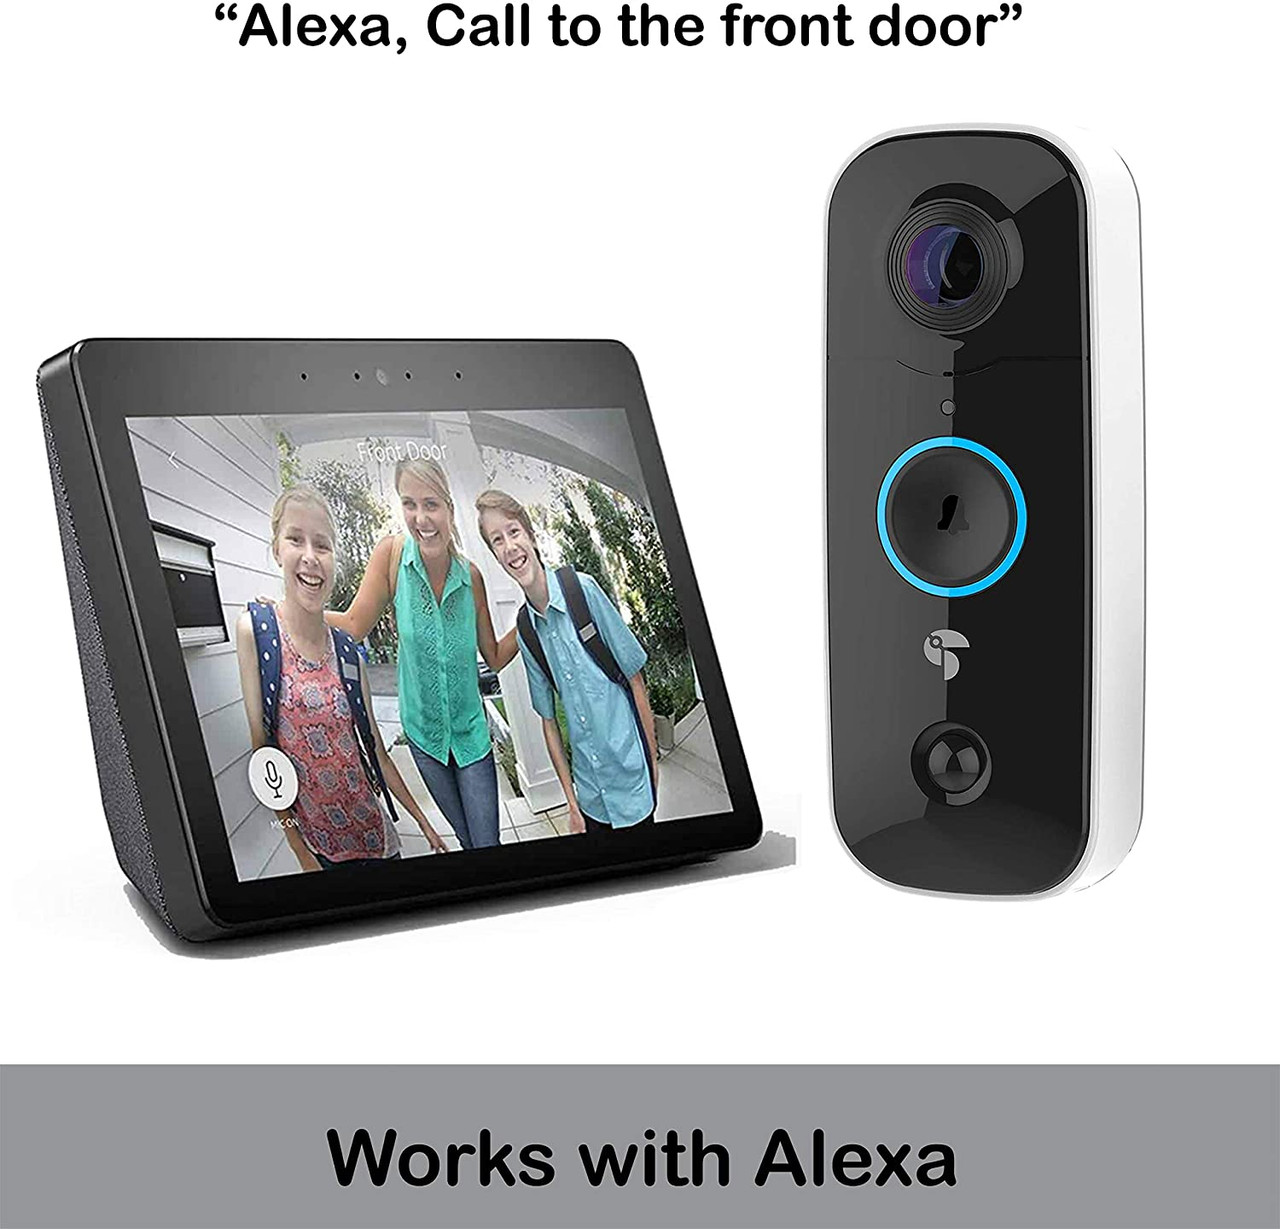 TOUCAN Video Doorbell Camera 1080p HD with Chime, Motion Detector, Wifi, Video Night Vision, 180° Wide Angle, 2-Way Audio, Weatherproof, Works with Alexa